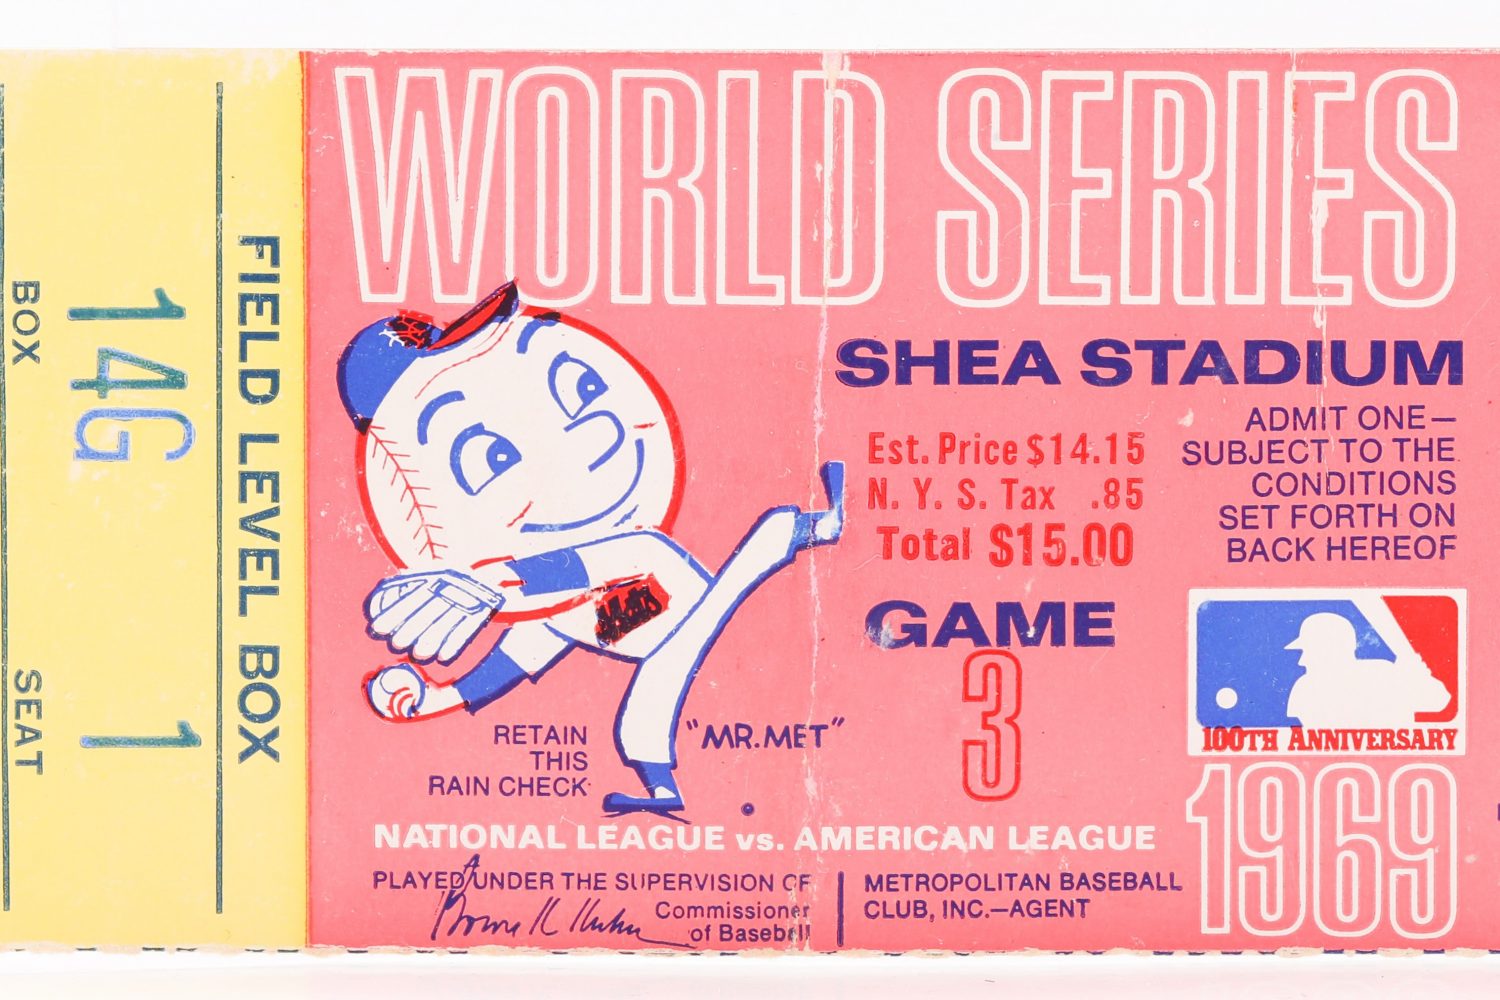 Ticket to Game 3 of the 1969 World Series